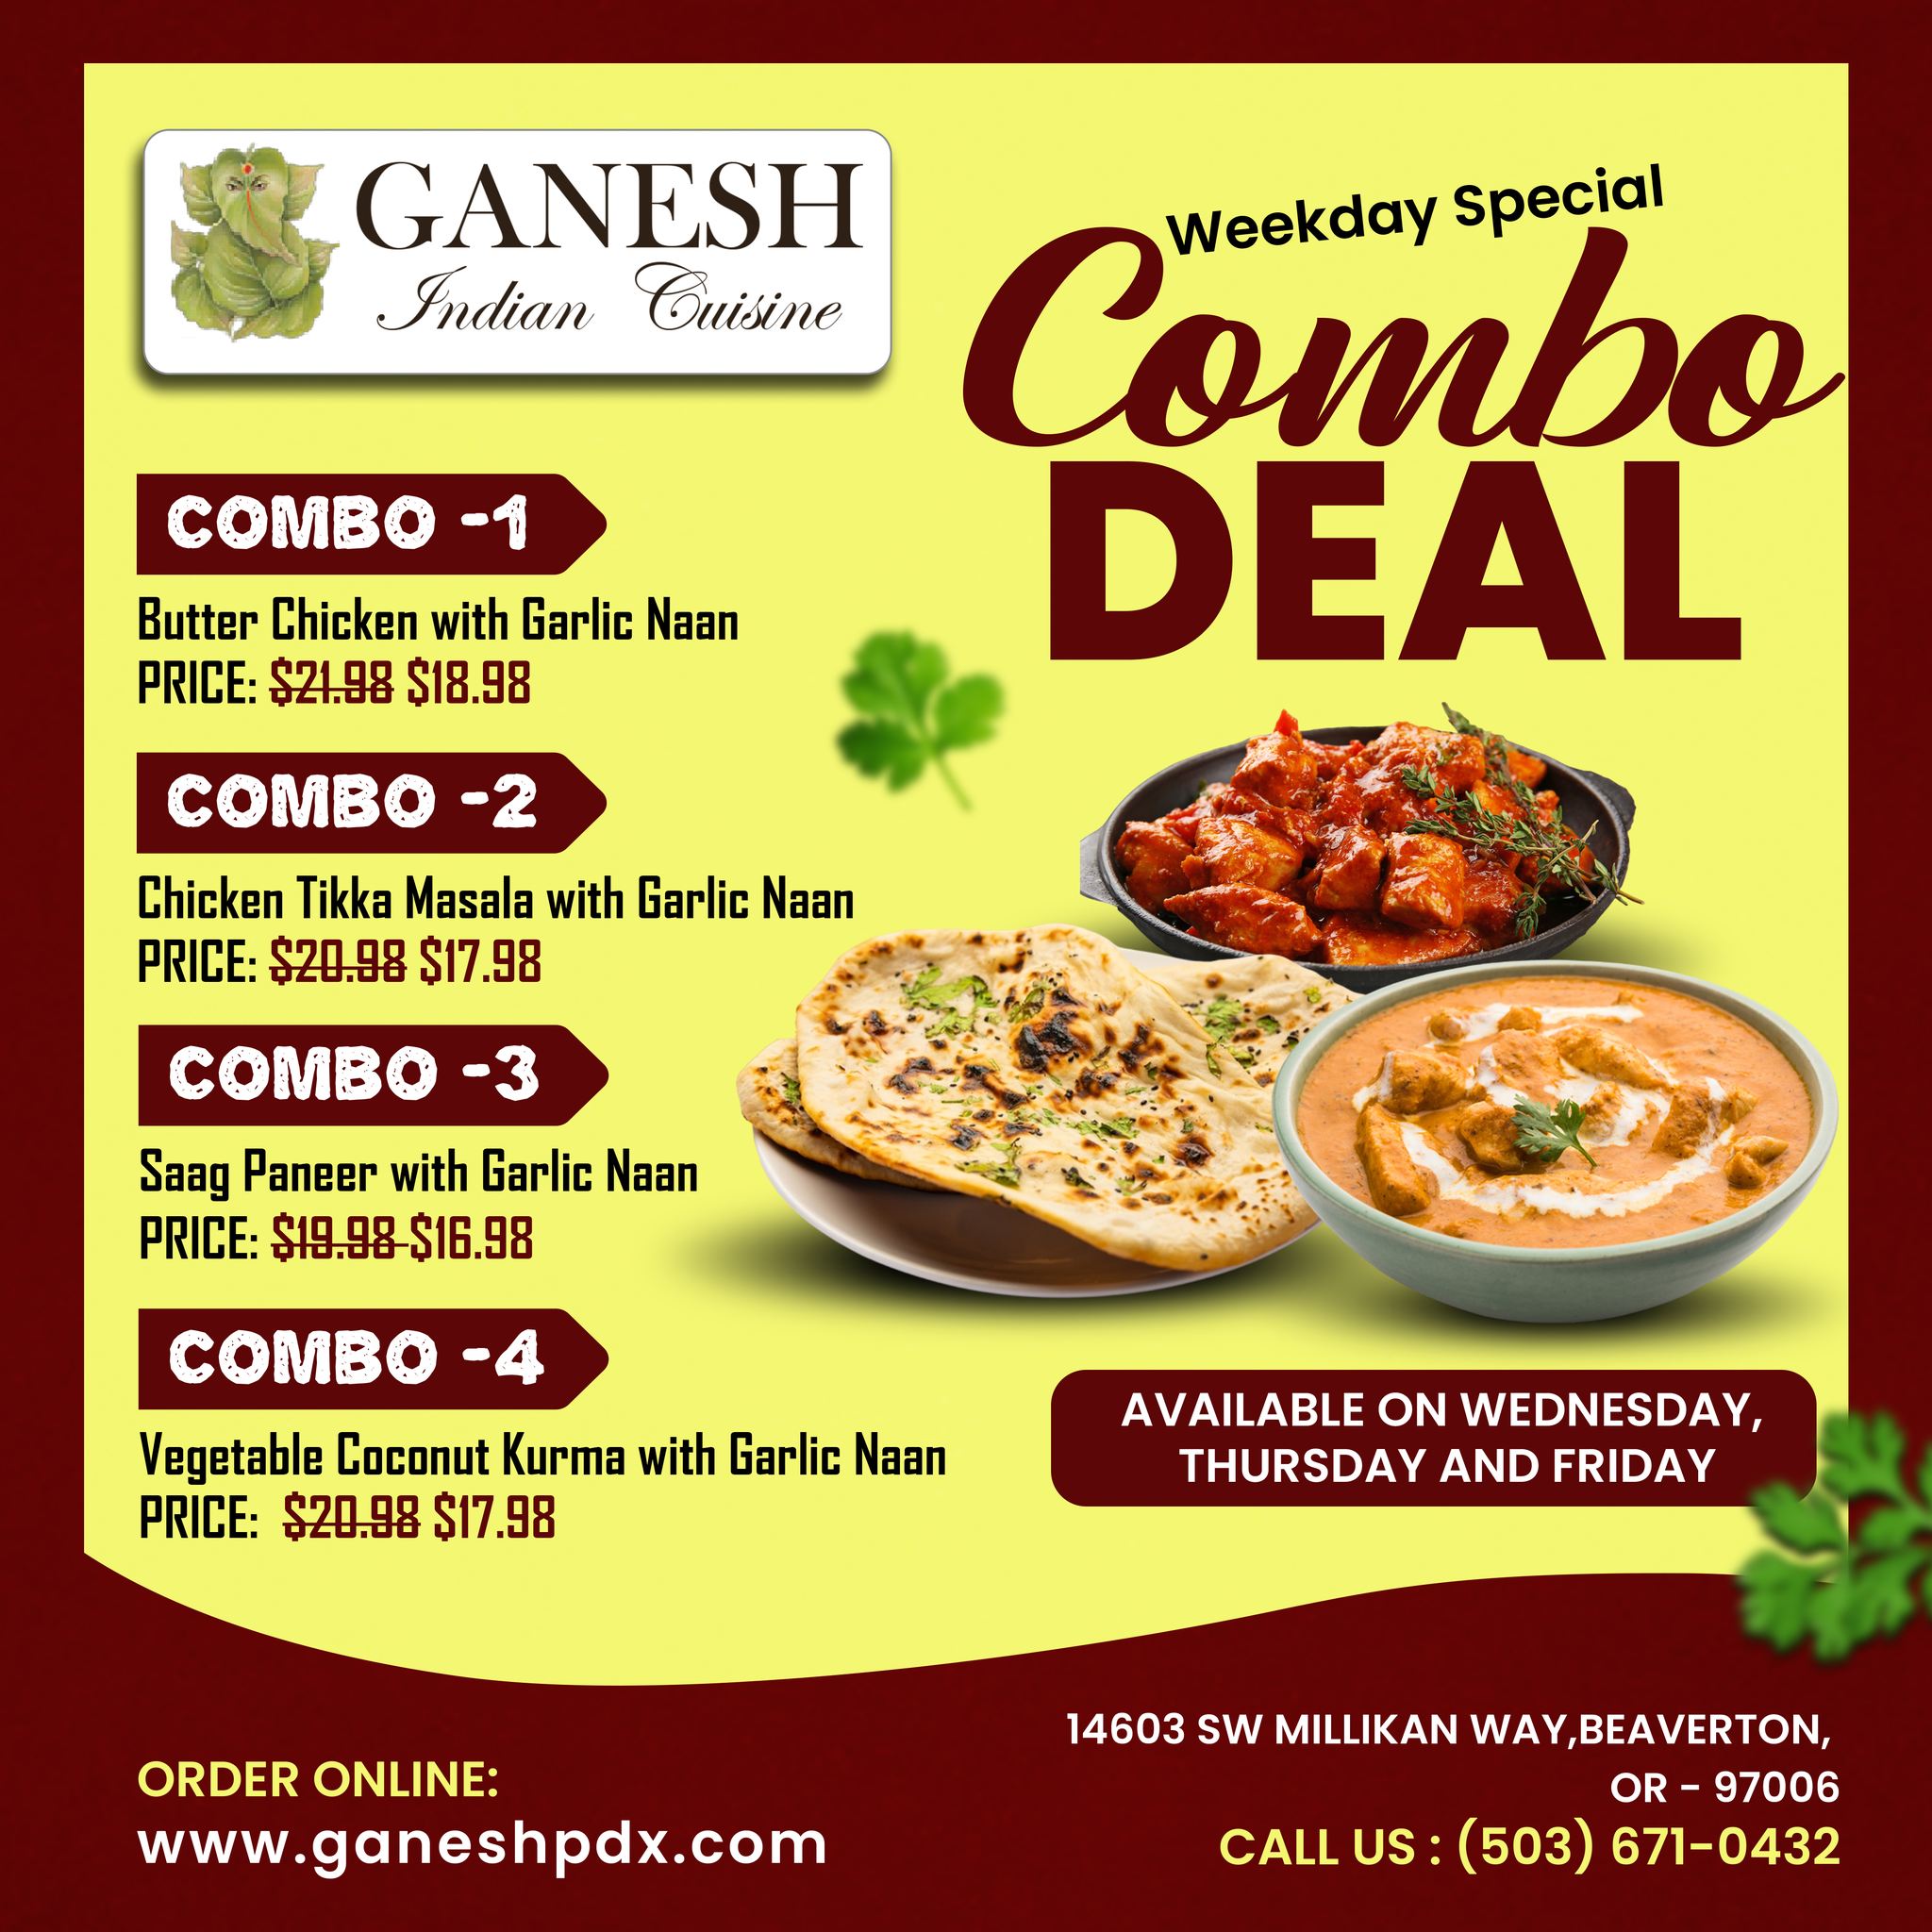 Weekday Combo Deal